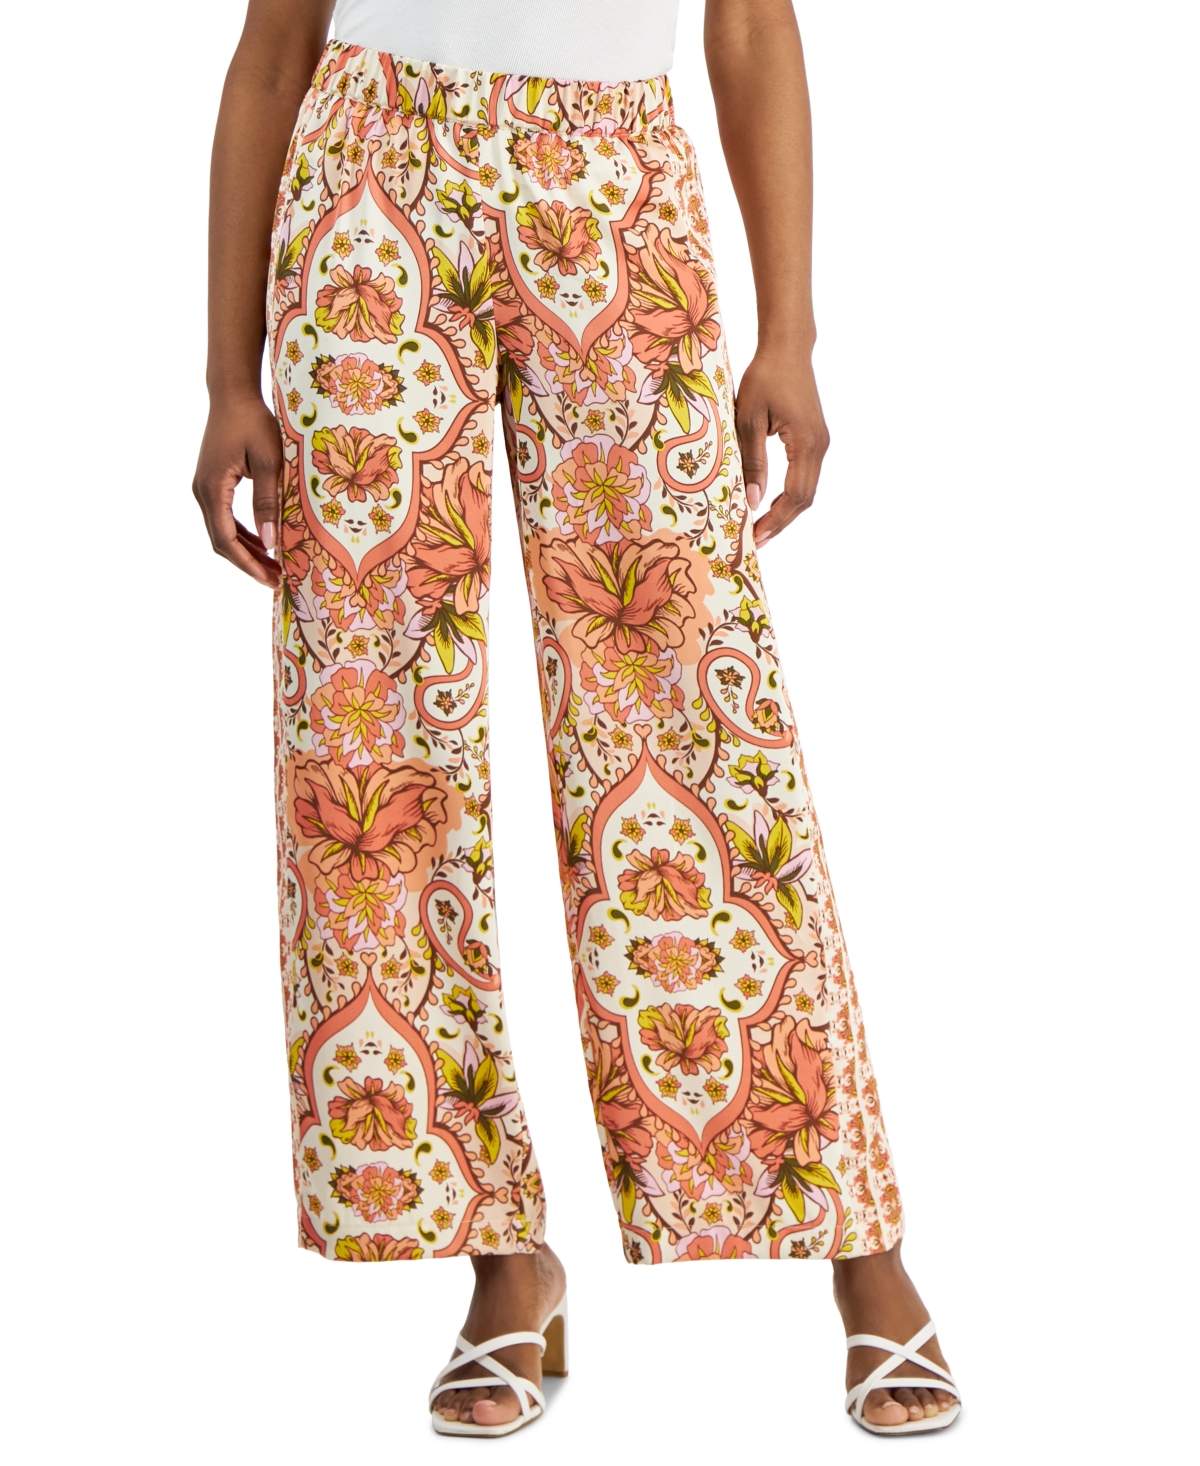 Petite Medallion Melody Satin Pants, Created for Macy's - Sandshell Combo